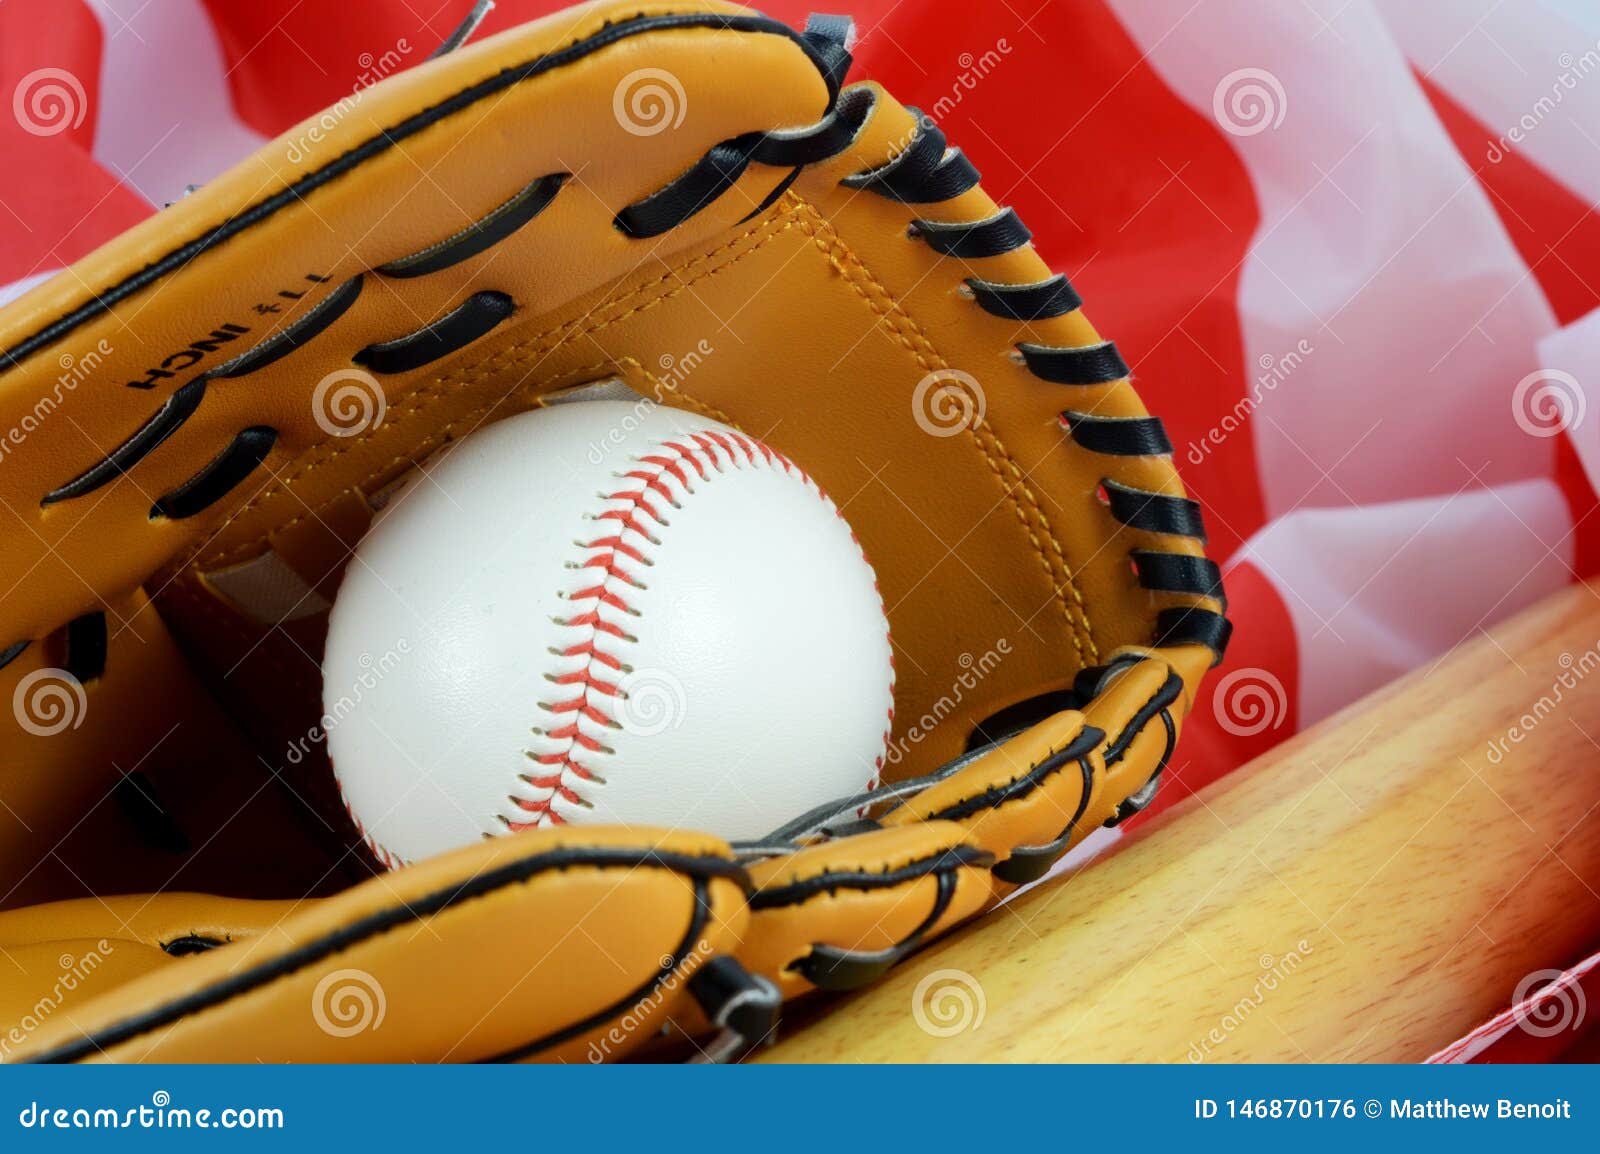 Baseball AmericaS Pastime Many People Dream Of